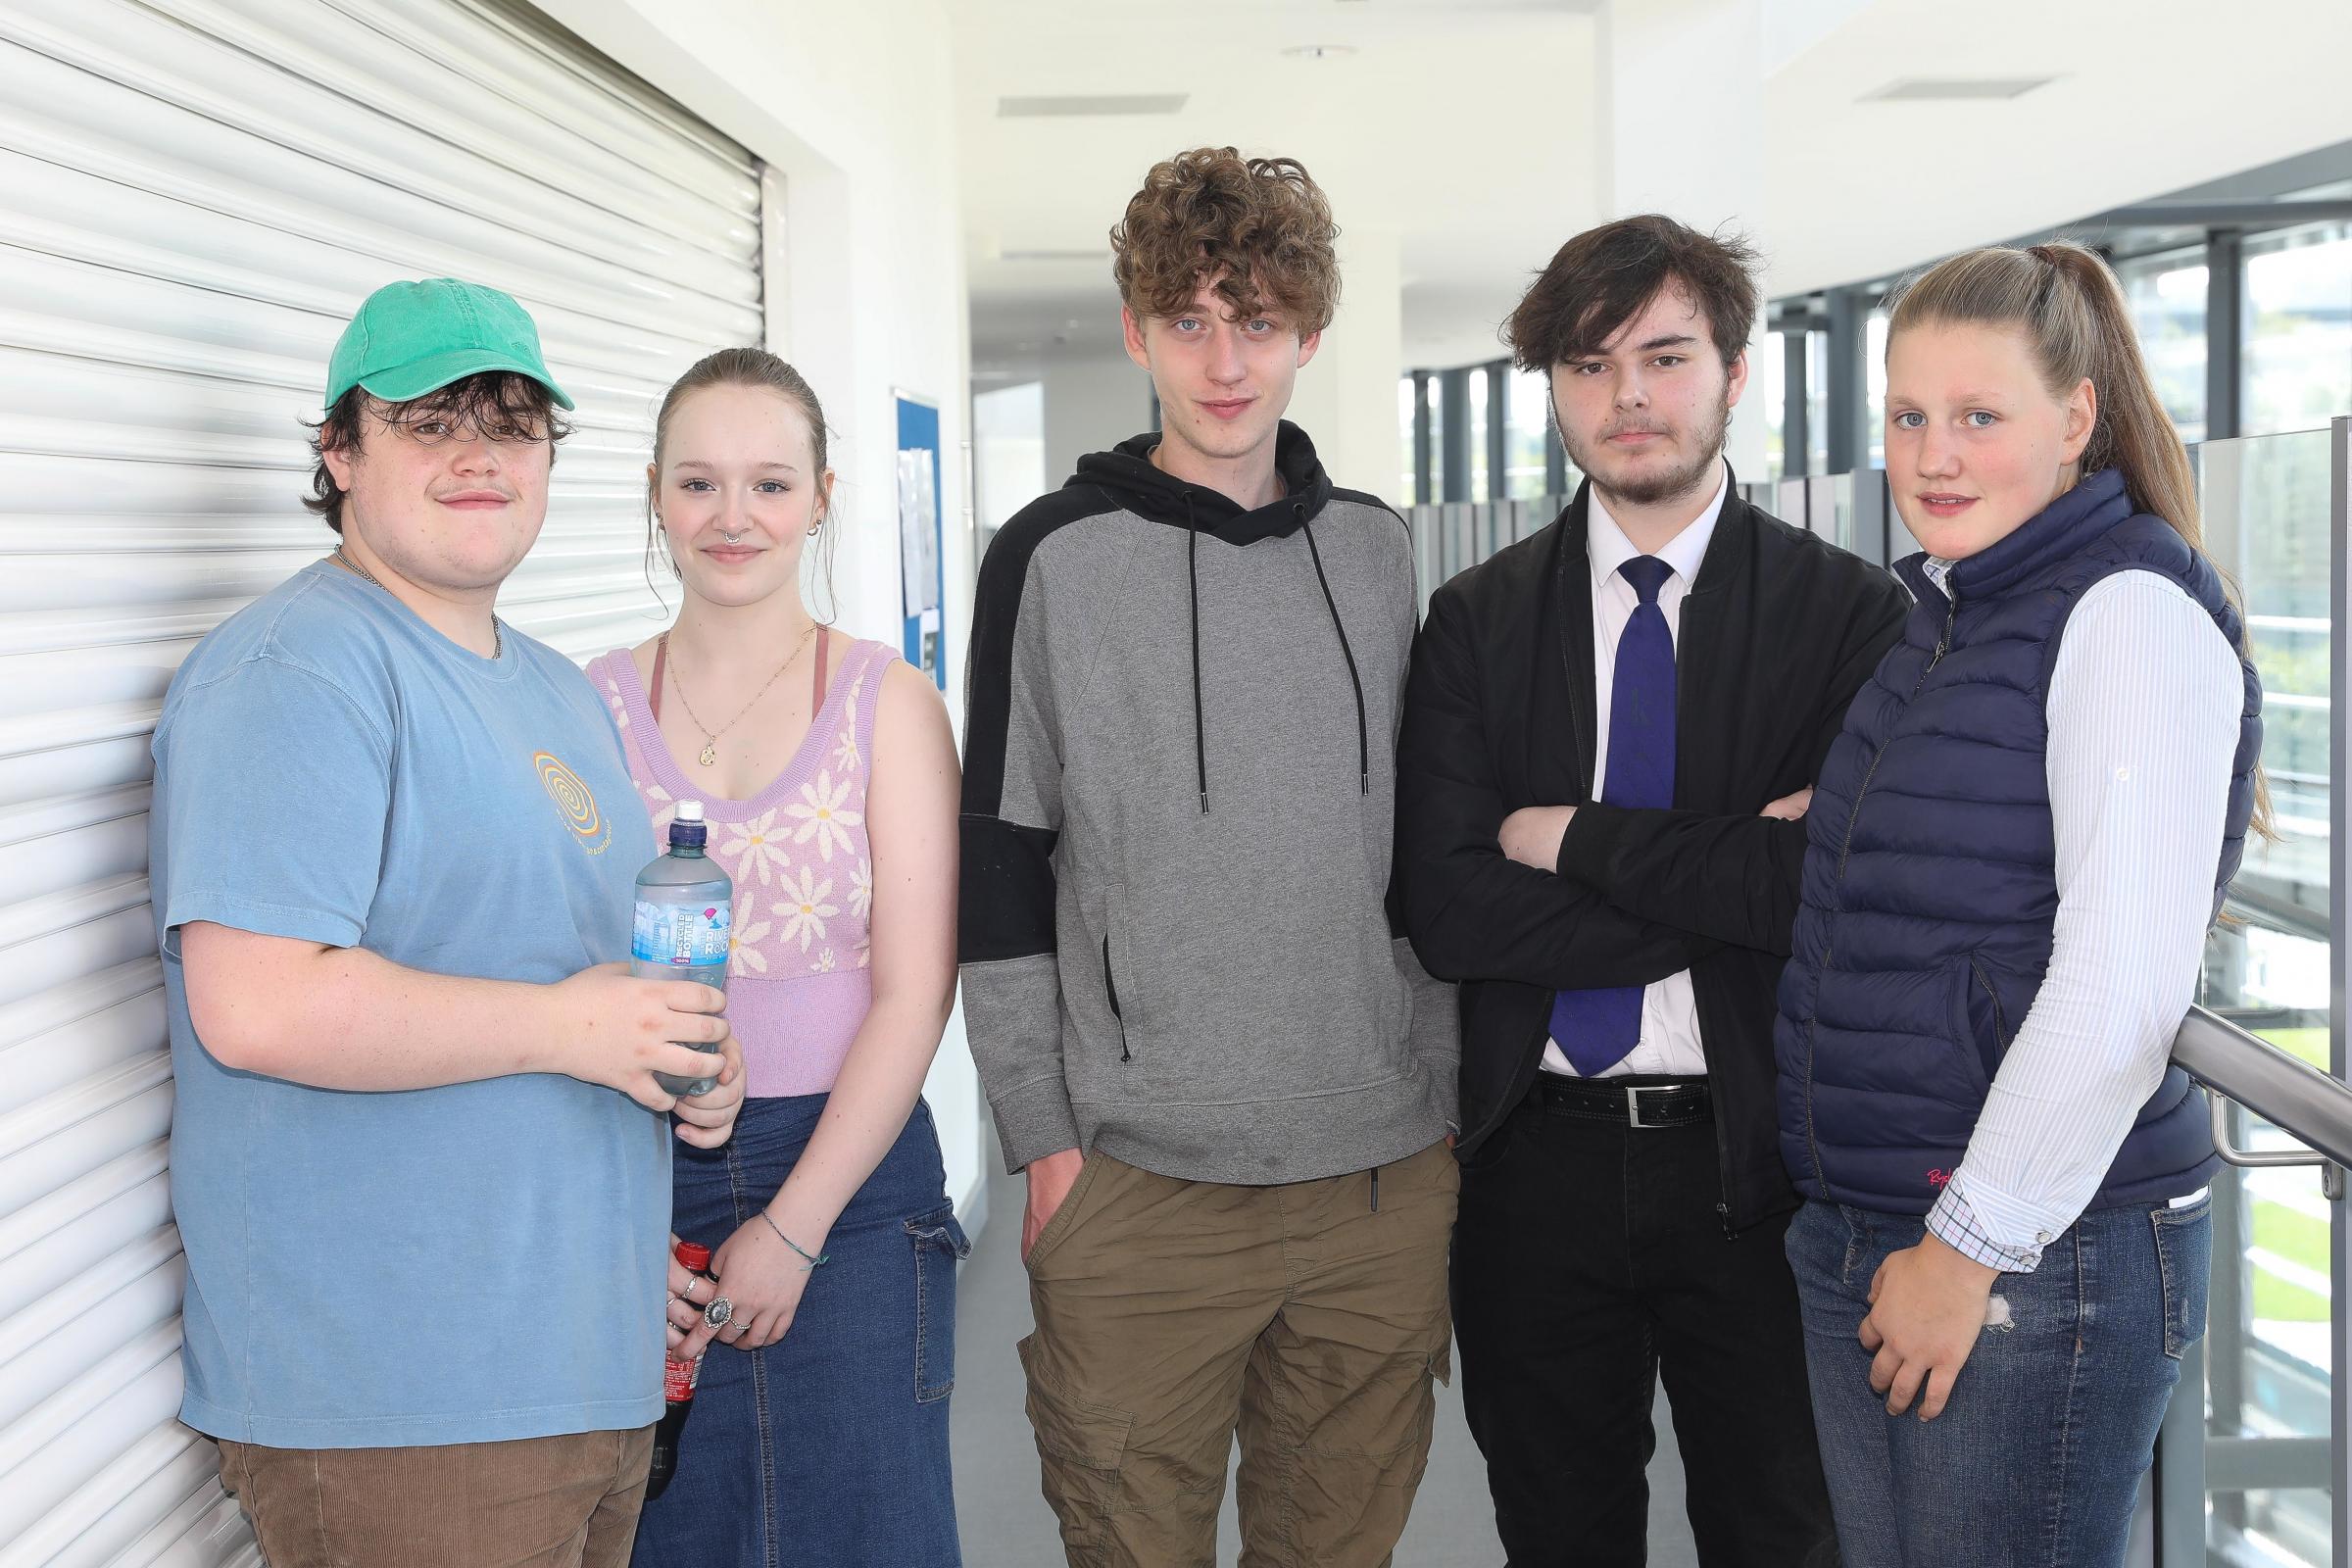 South West College students receiving their results. Pictured from left: Charlie Handley, Amelia Poulton, Fiachra Avery and Rebekah Nicholl. Photo: Tim Flaherty.